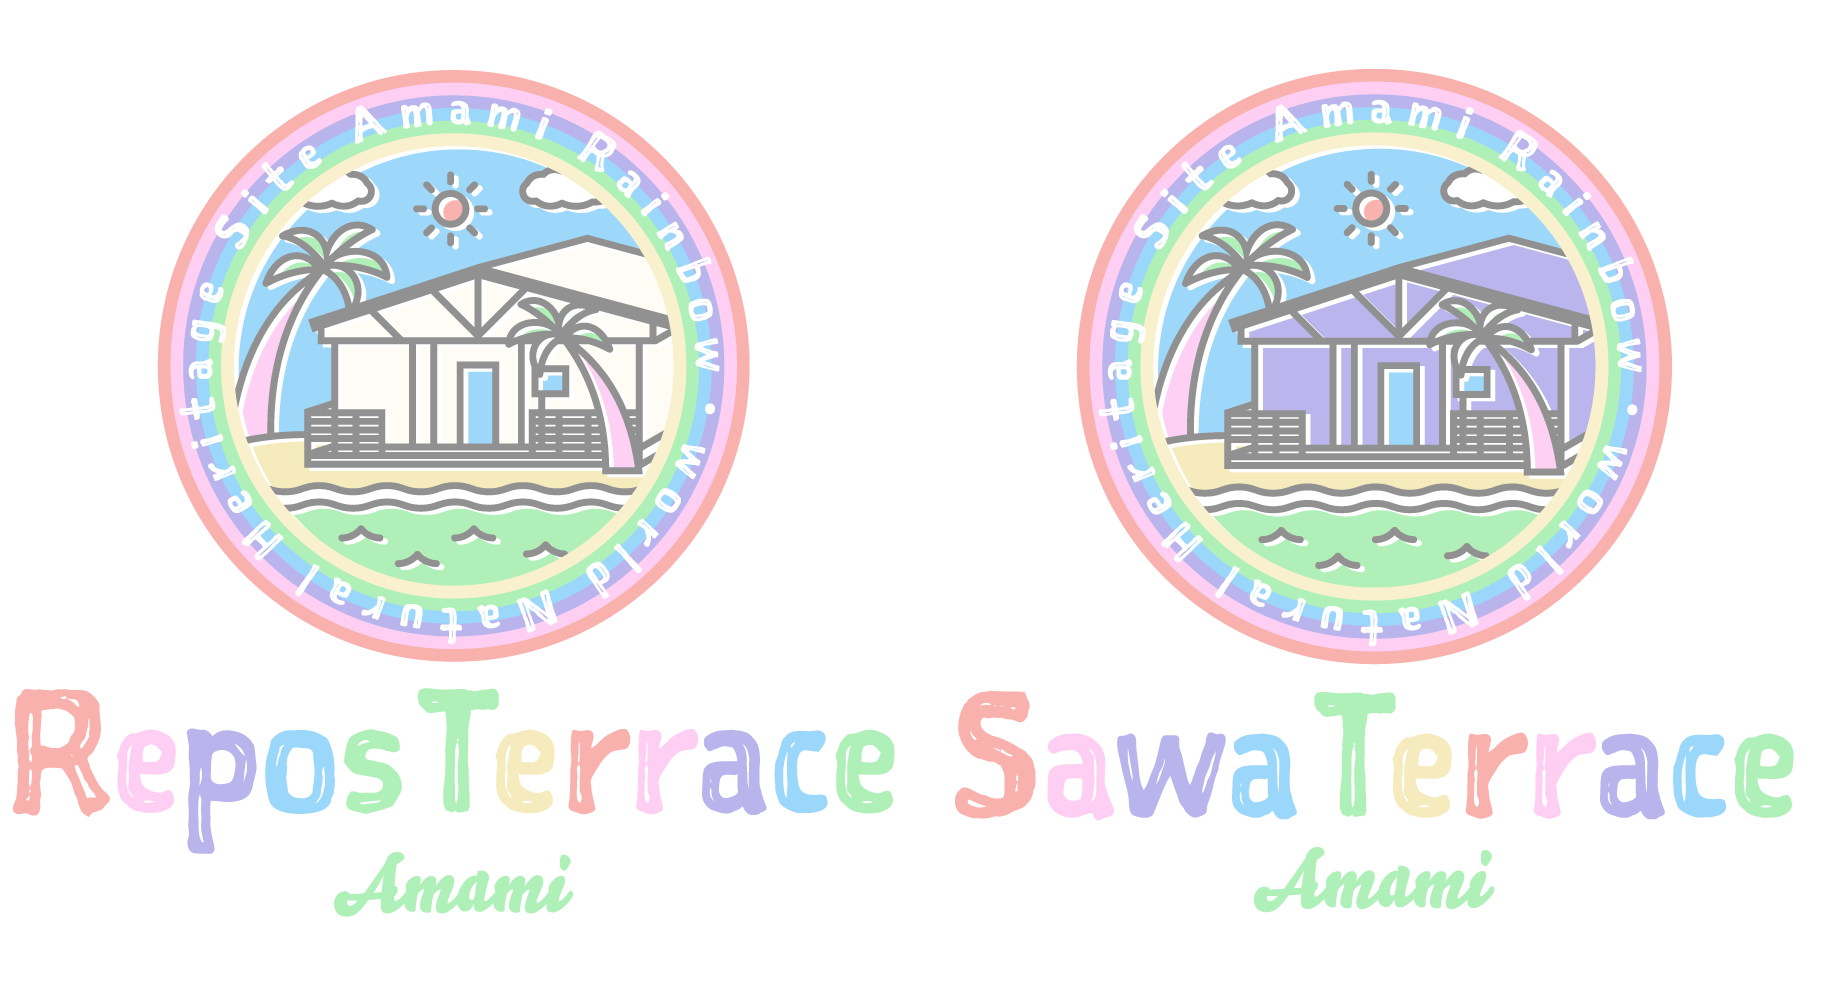 sawaterrace_and_reposterrace Terraceの周辺施設ページ